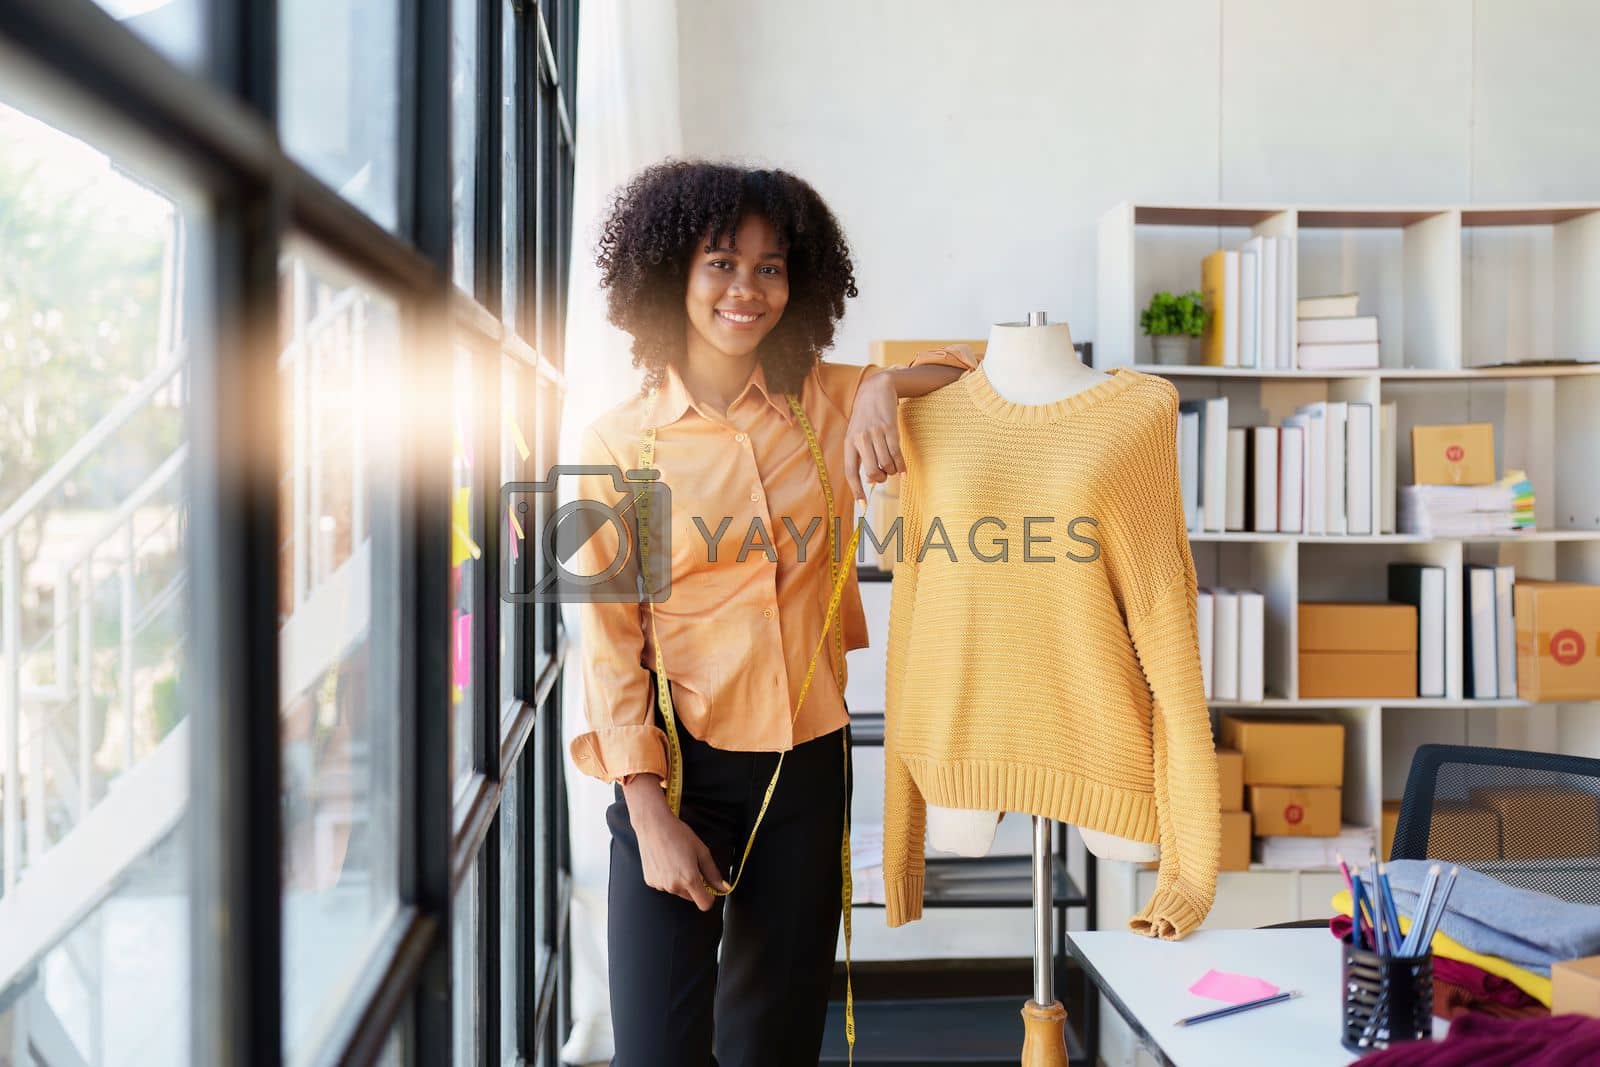 Royalty free image of Portrait of young african american woman fashion designer stylish working at fashion studio by itchaznong